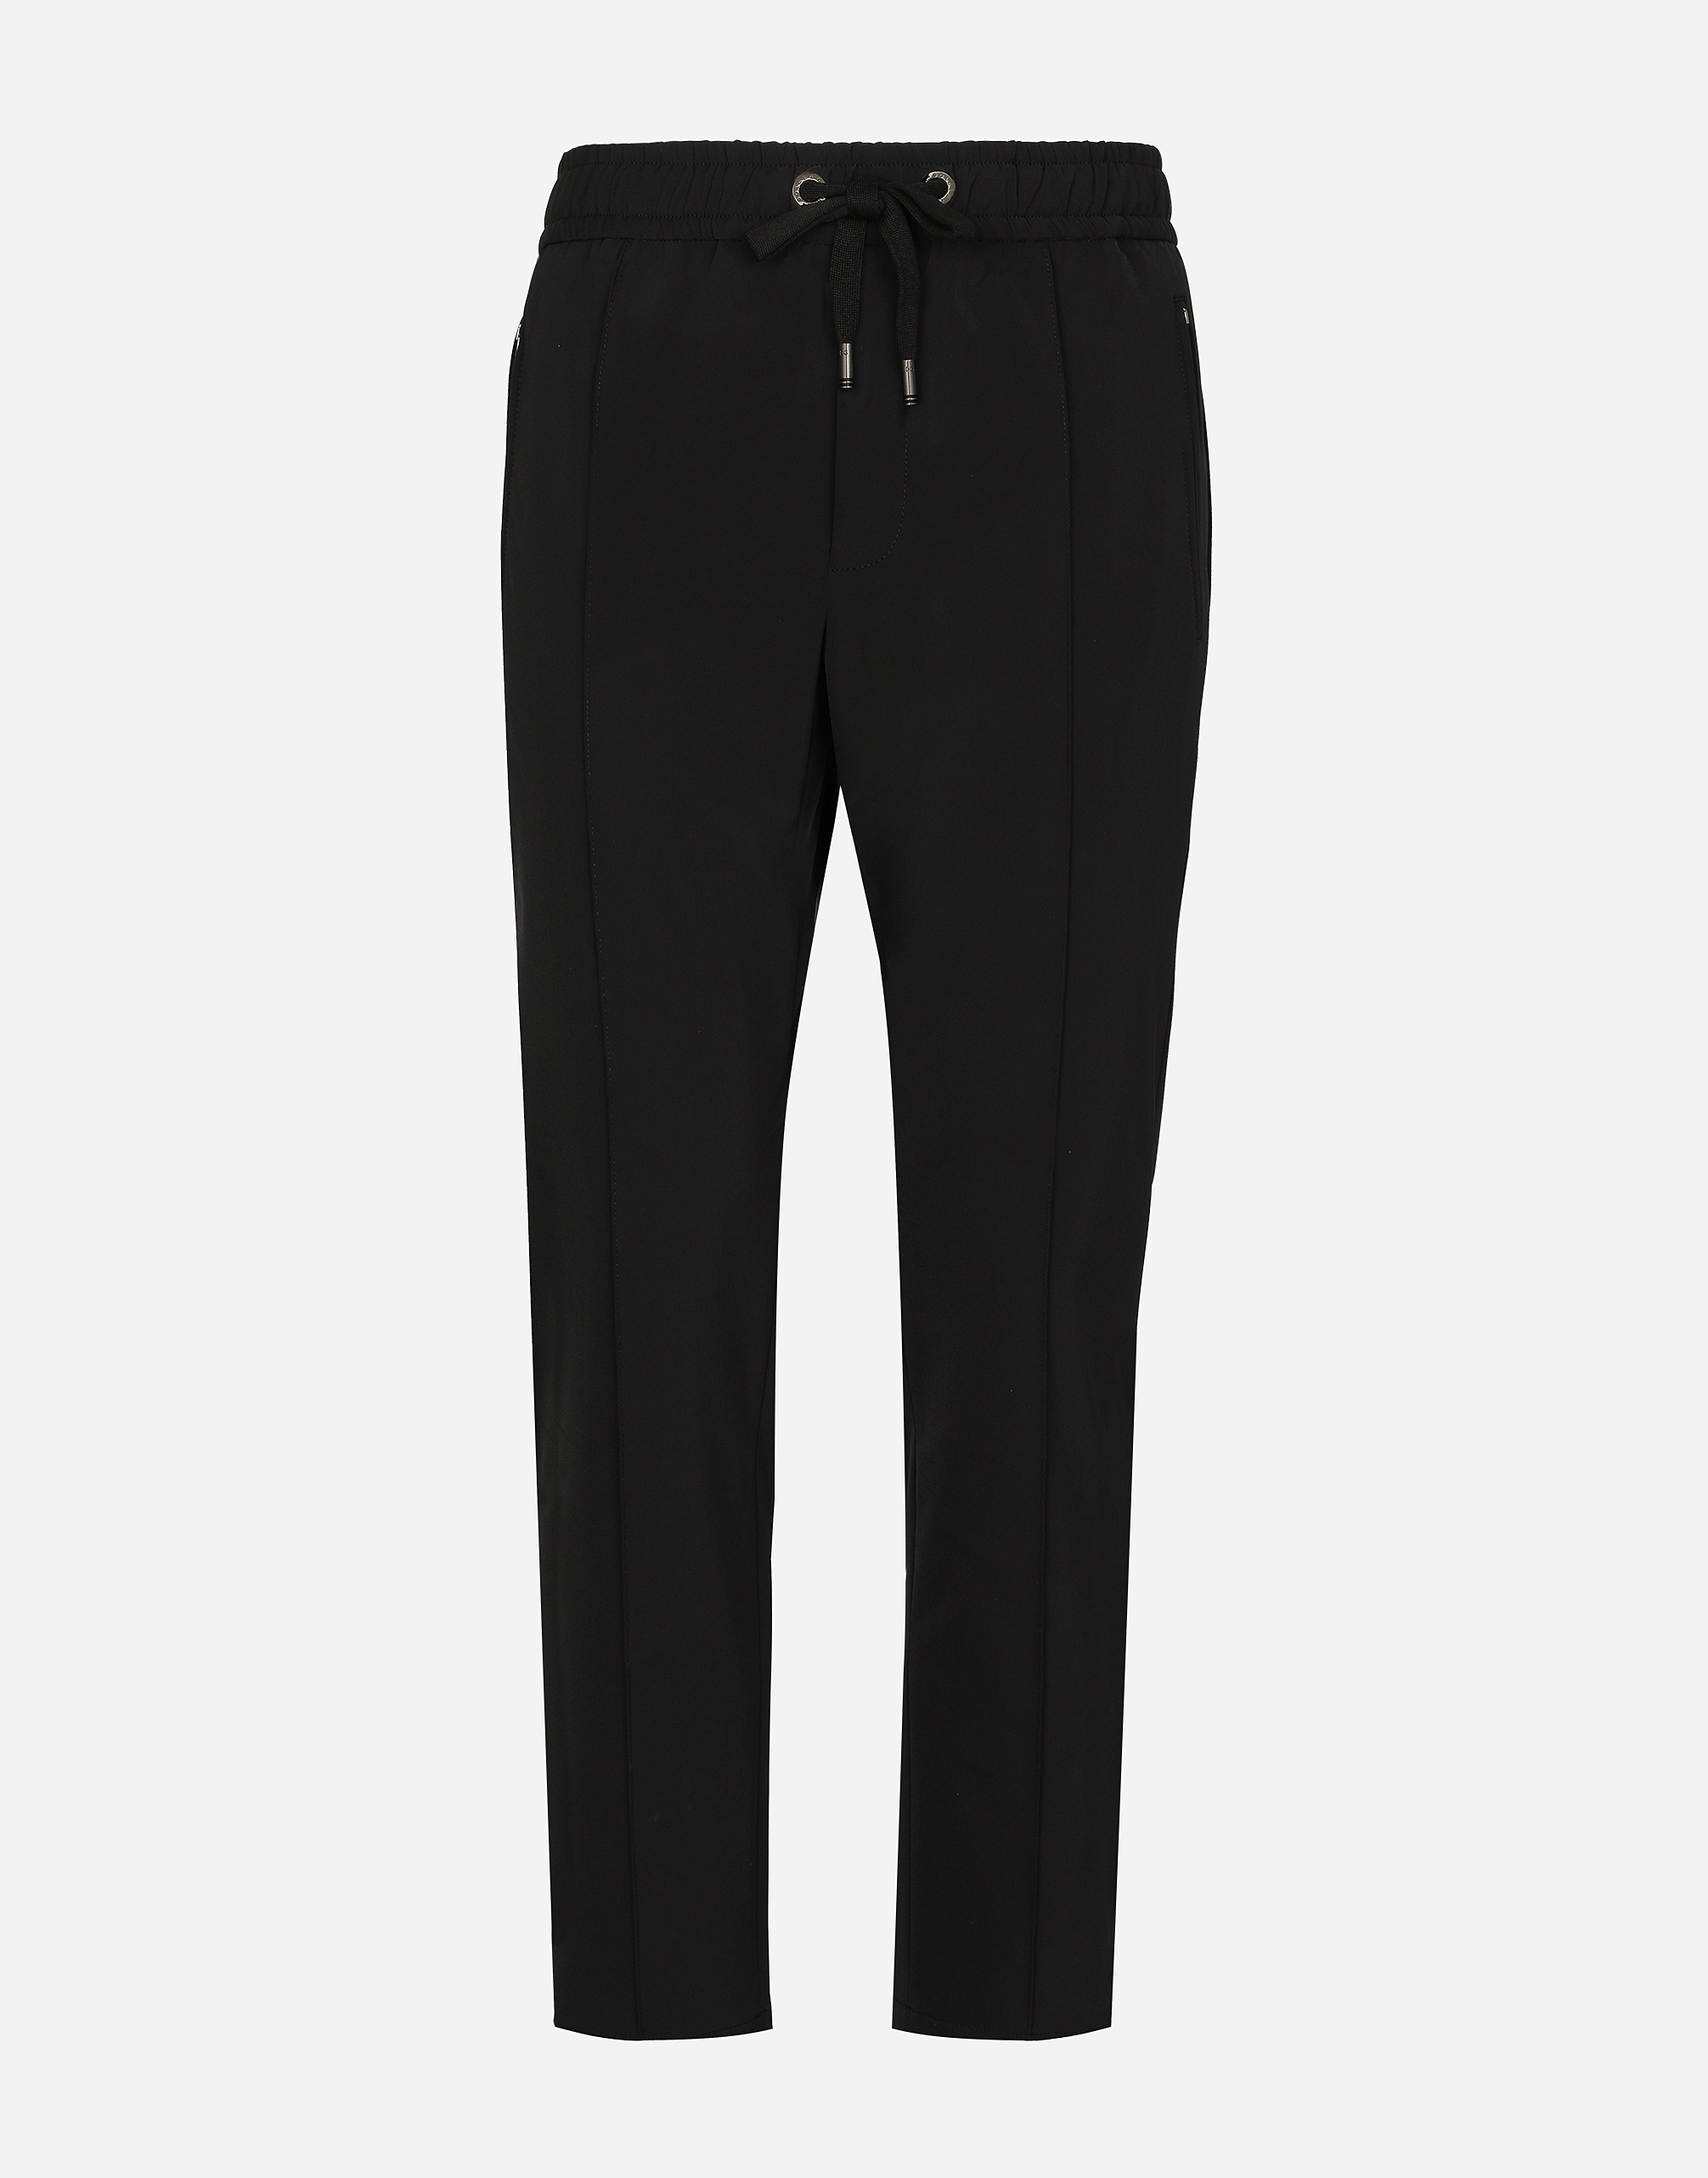 Stretch technical fabric jogging pants in Black